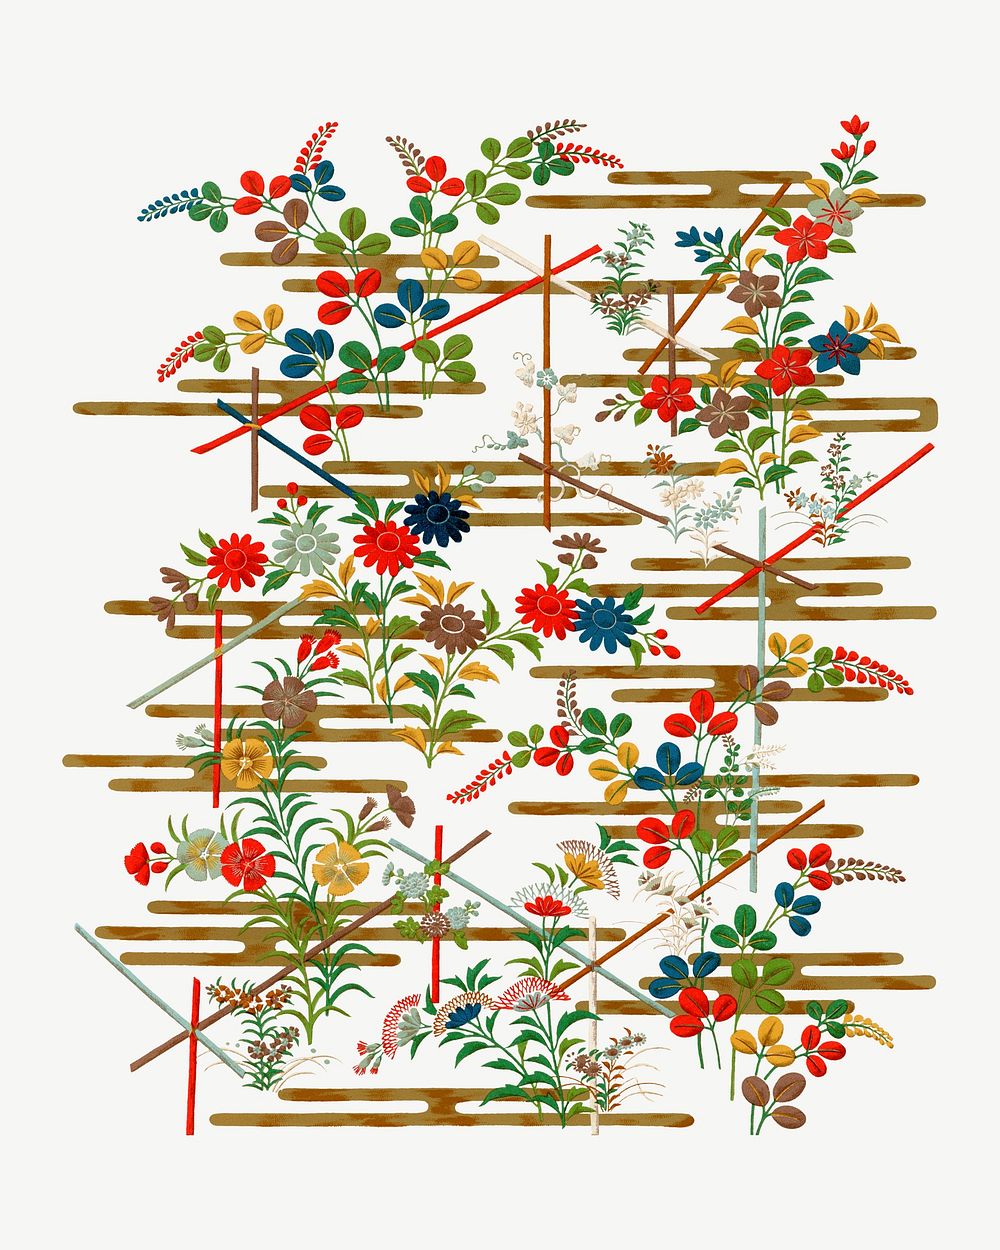 Japanese decorative pattern, vintage painting by G.A. Audsley-Japanese illustration psd. Remixed by rawpixel.